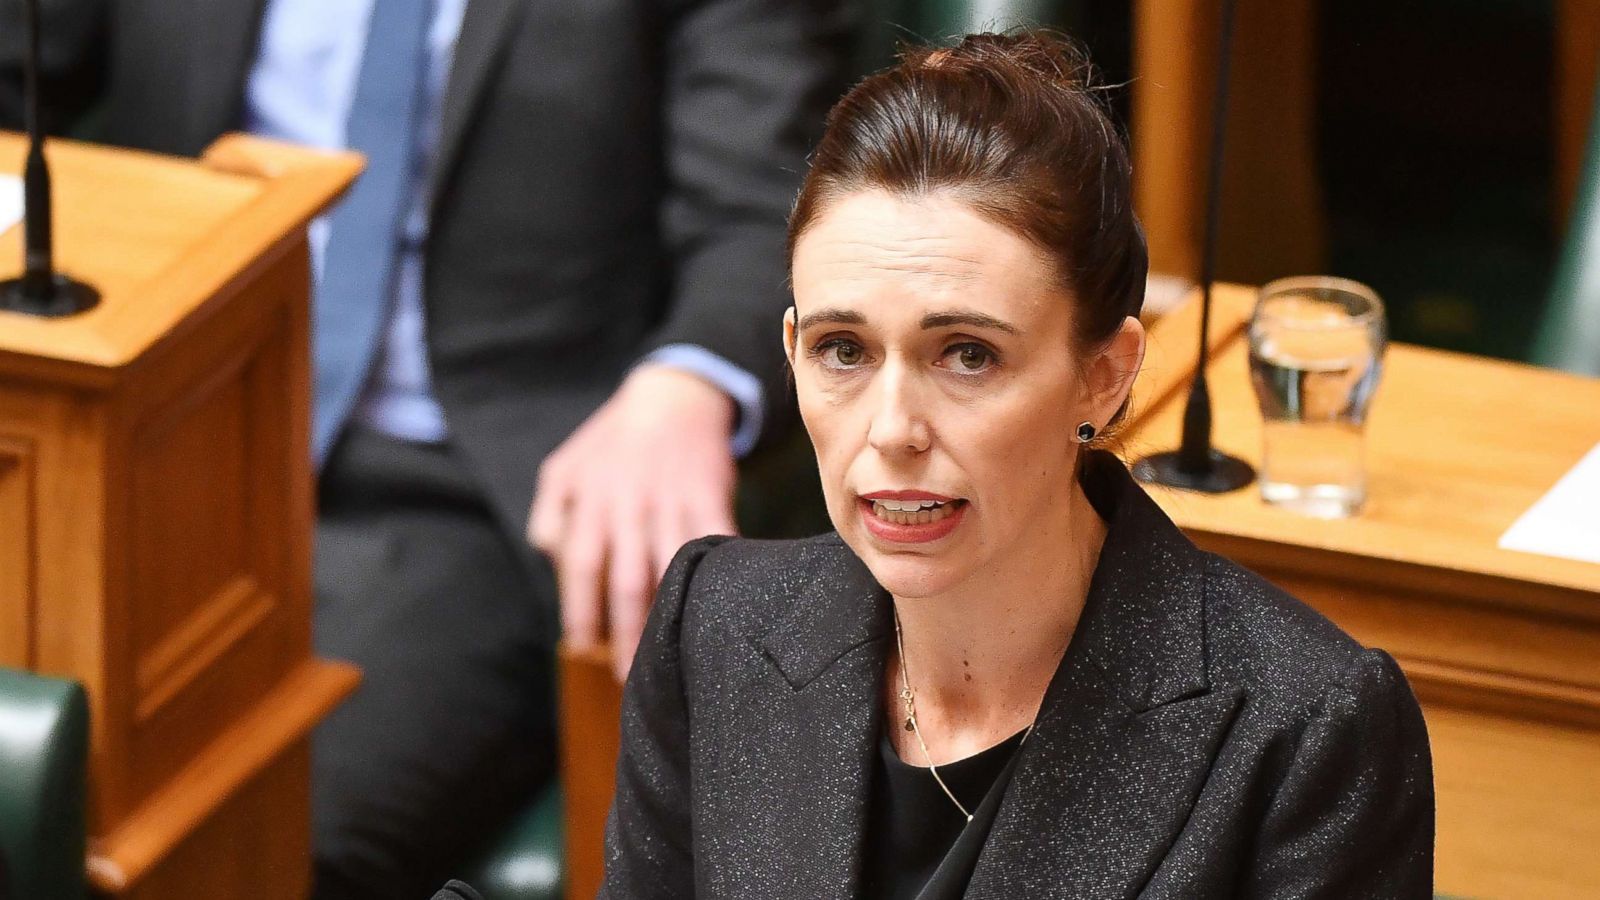 New Zealand Prime Minister Jacinda Ardern vows to 'never' say mosque shooter's name